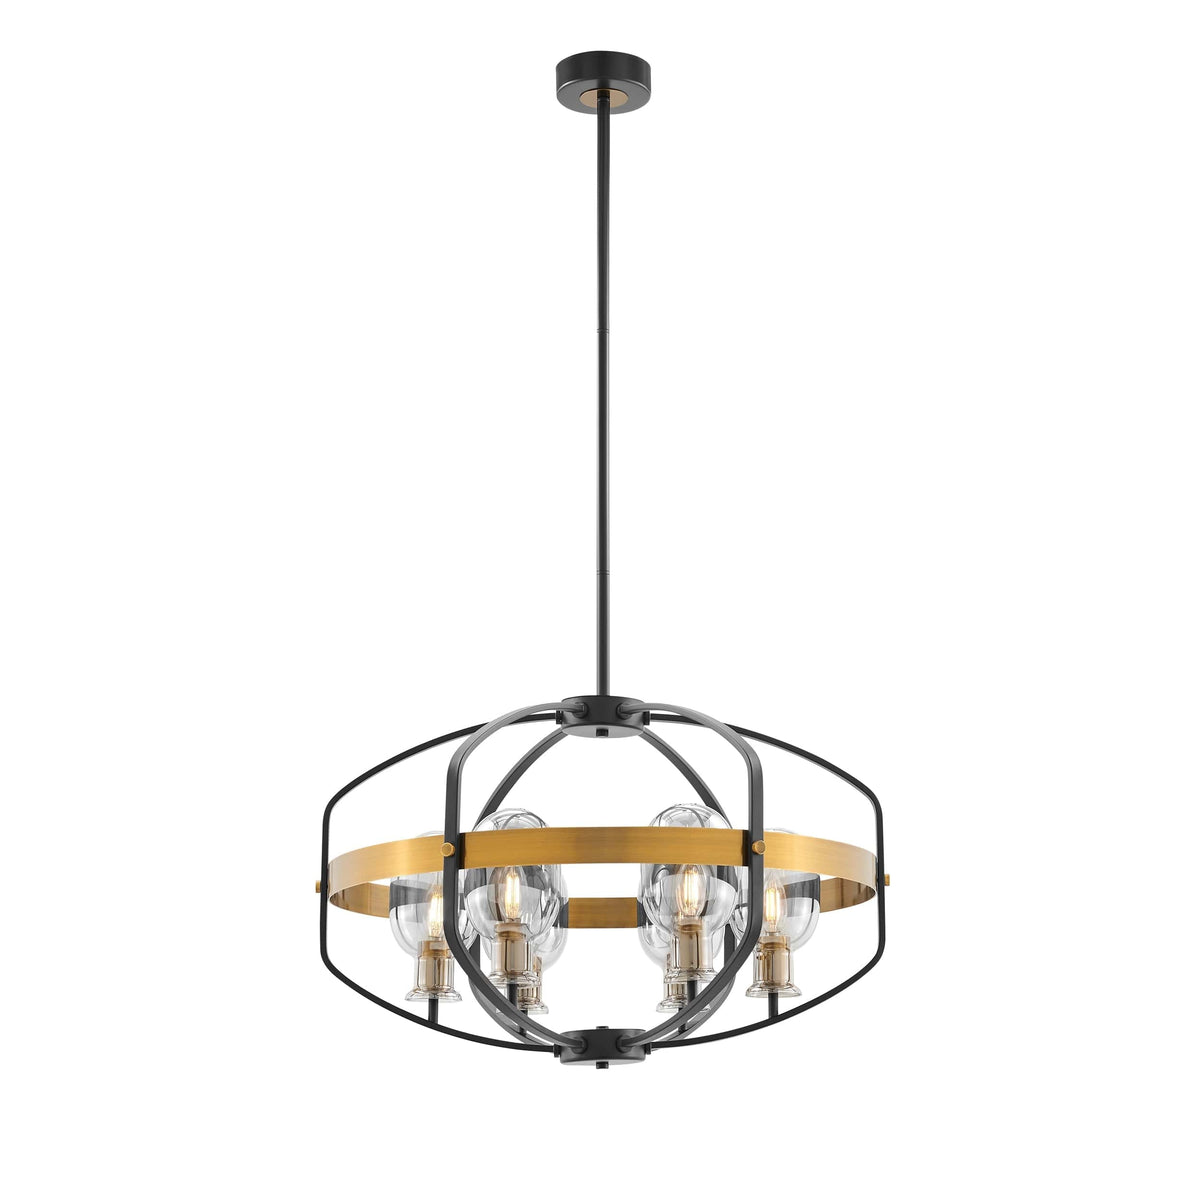 Finesse Decor Opia Vintage Gold and Black Chandelier